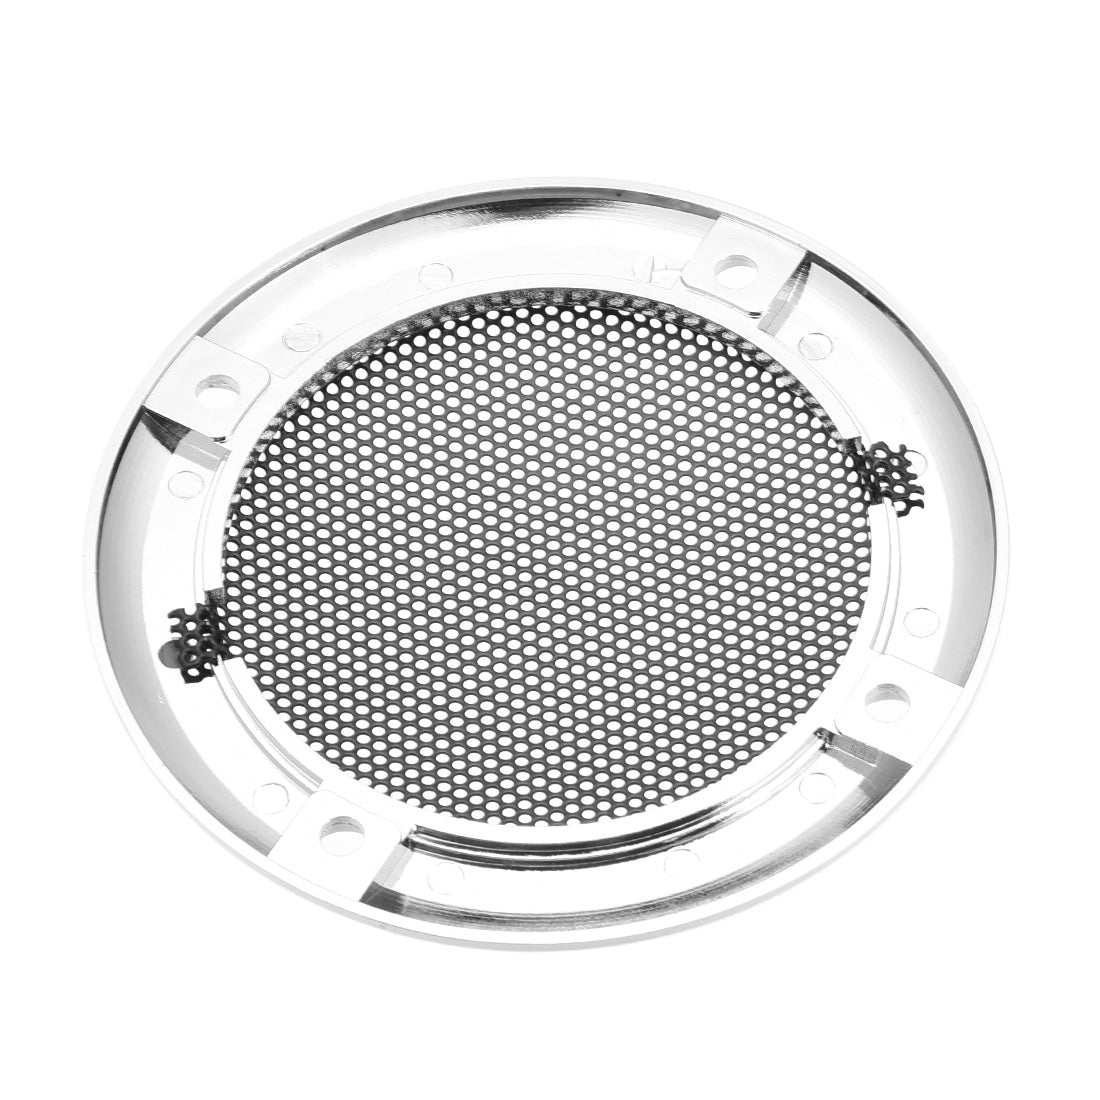 uxcell Uxcell Speaker Grill Cover 3.5 Inch 107mm Mesh Decorative Circle Subwoofer Guard Protector Silver